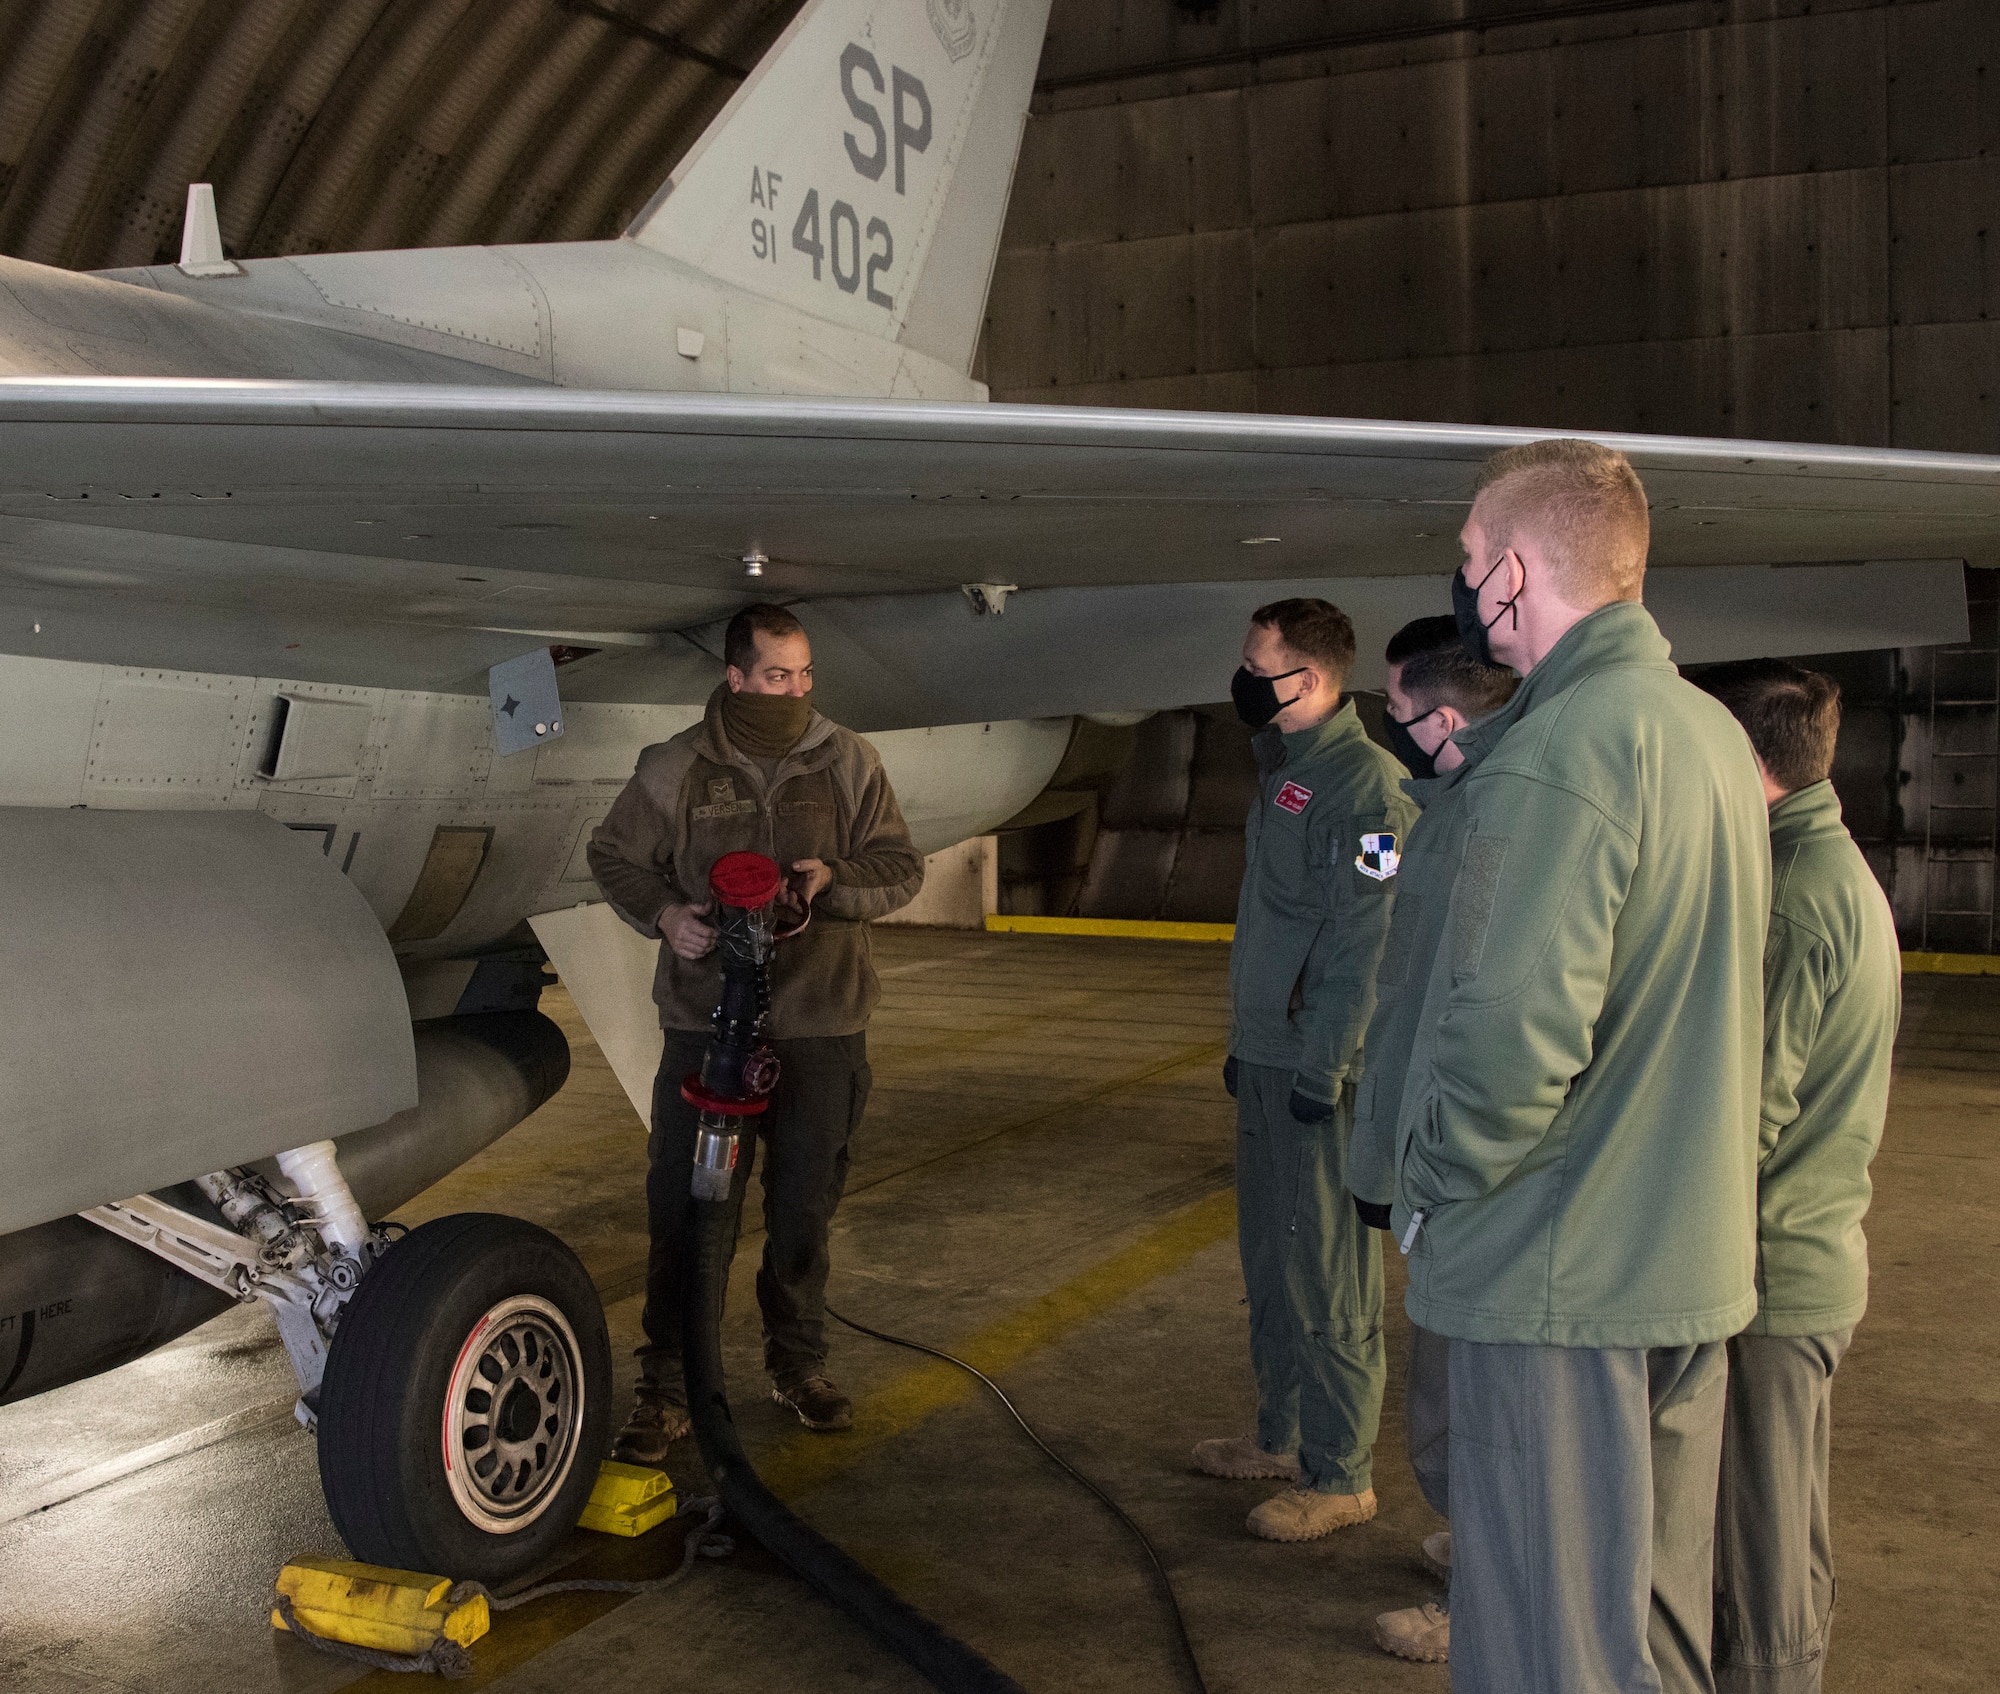 U.S. Air Force Senior Airman Ryan Versen, 52nd Aircraft Maintenance Squadron assistant dedicated crew chief, left, trains pilots how to refuel an F-16 Fighting Falcon at Spangdahlem Air Base Germany, Dec. 11, 2020. The training provided a hands-on experience for pilots on how to refuel a jet in case a crew chief is not present. (U.S. Air Force photo by Senior Airman Chance D. Nardone)